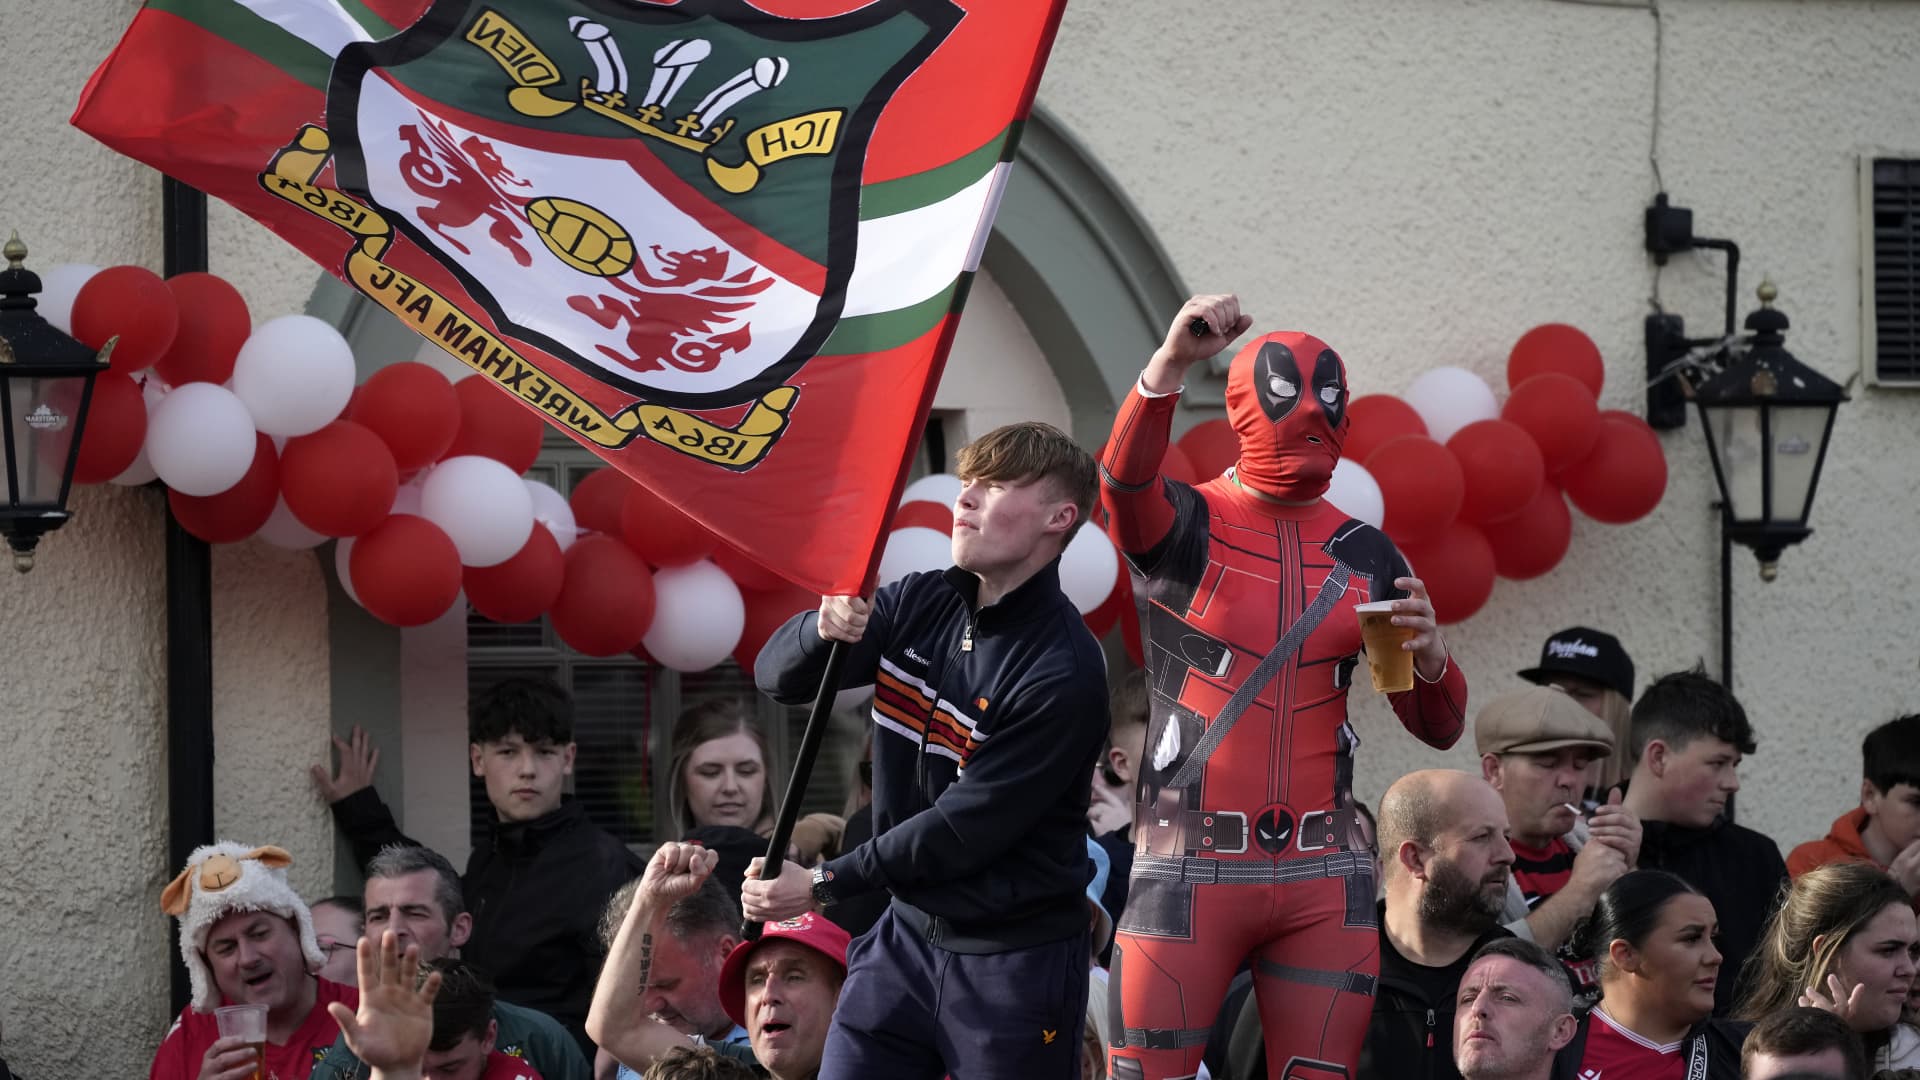 WREXHAM, Wales - May 2, 2023: Wrexham AFC fans celebrate during a bus parade following their league title win. One fan has donned the costume of Deadpool, the comic book character played by co-owner Ryan Reynolds.